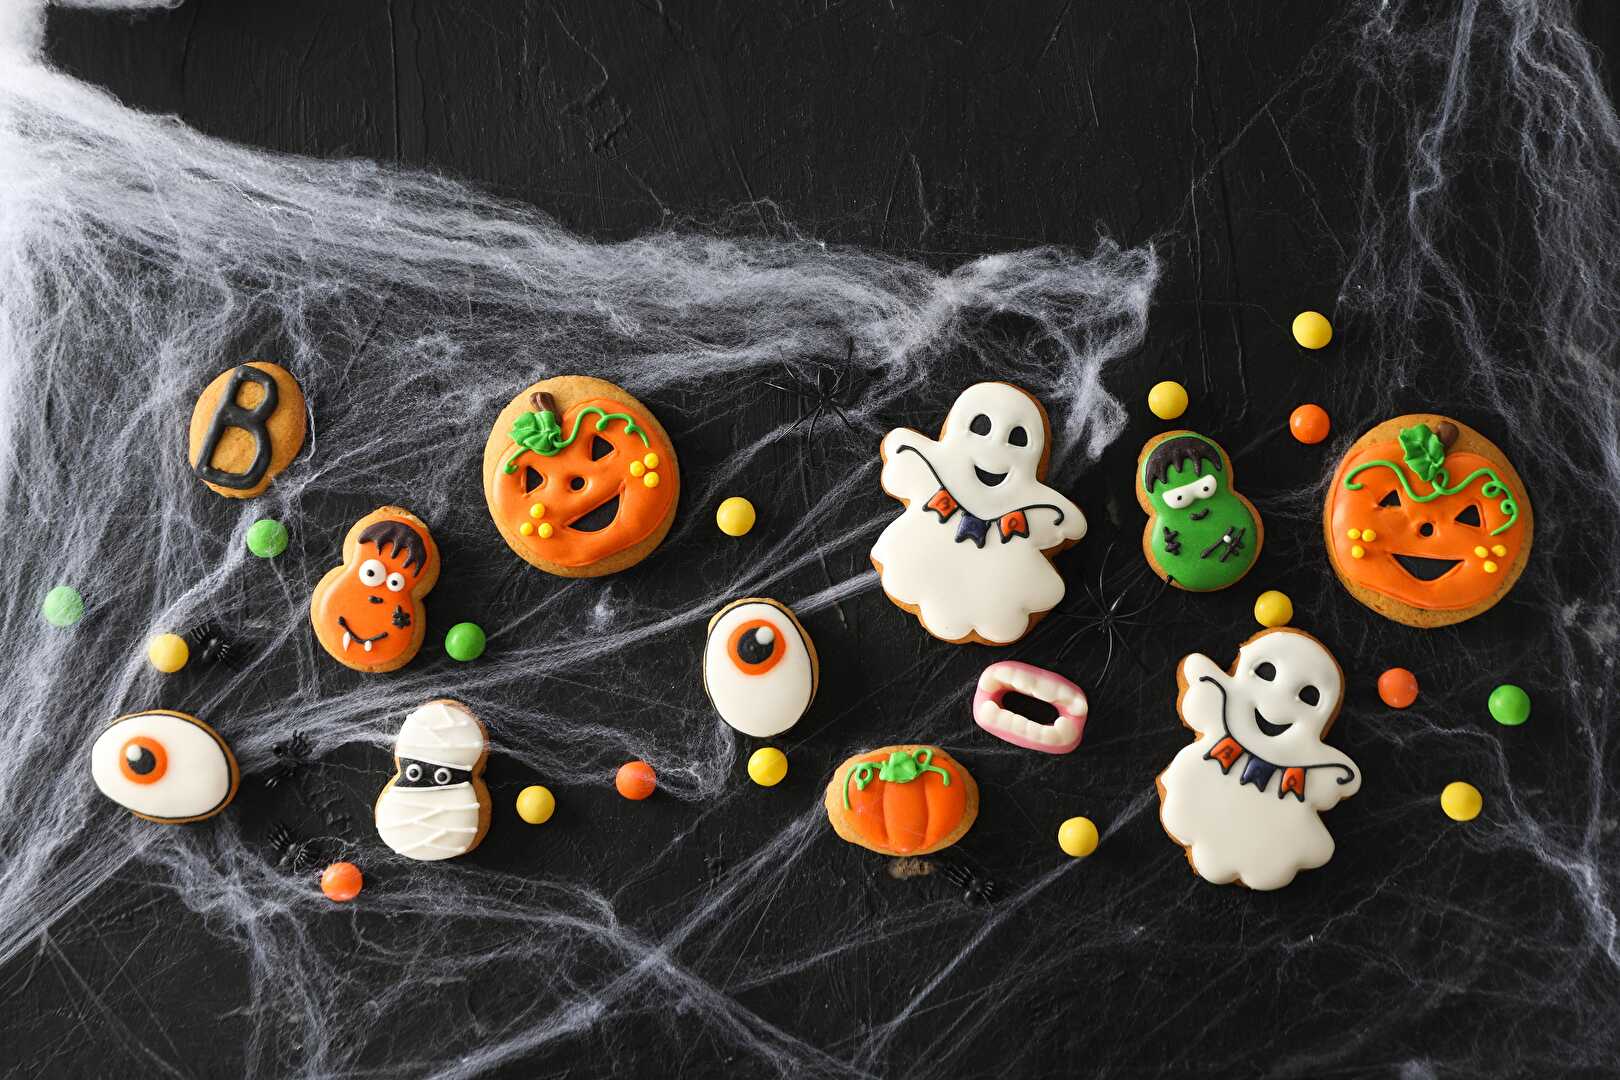 7 easy Halloween recipes in 20 minutes or less